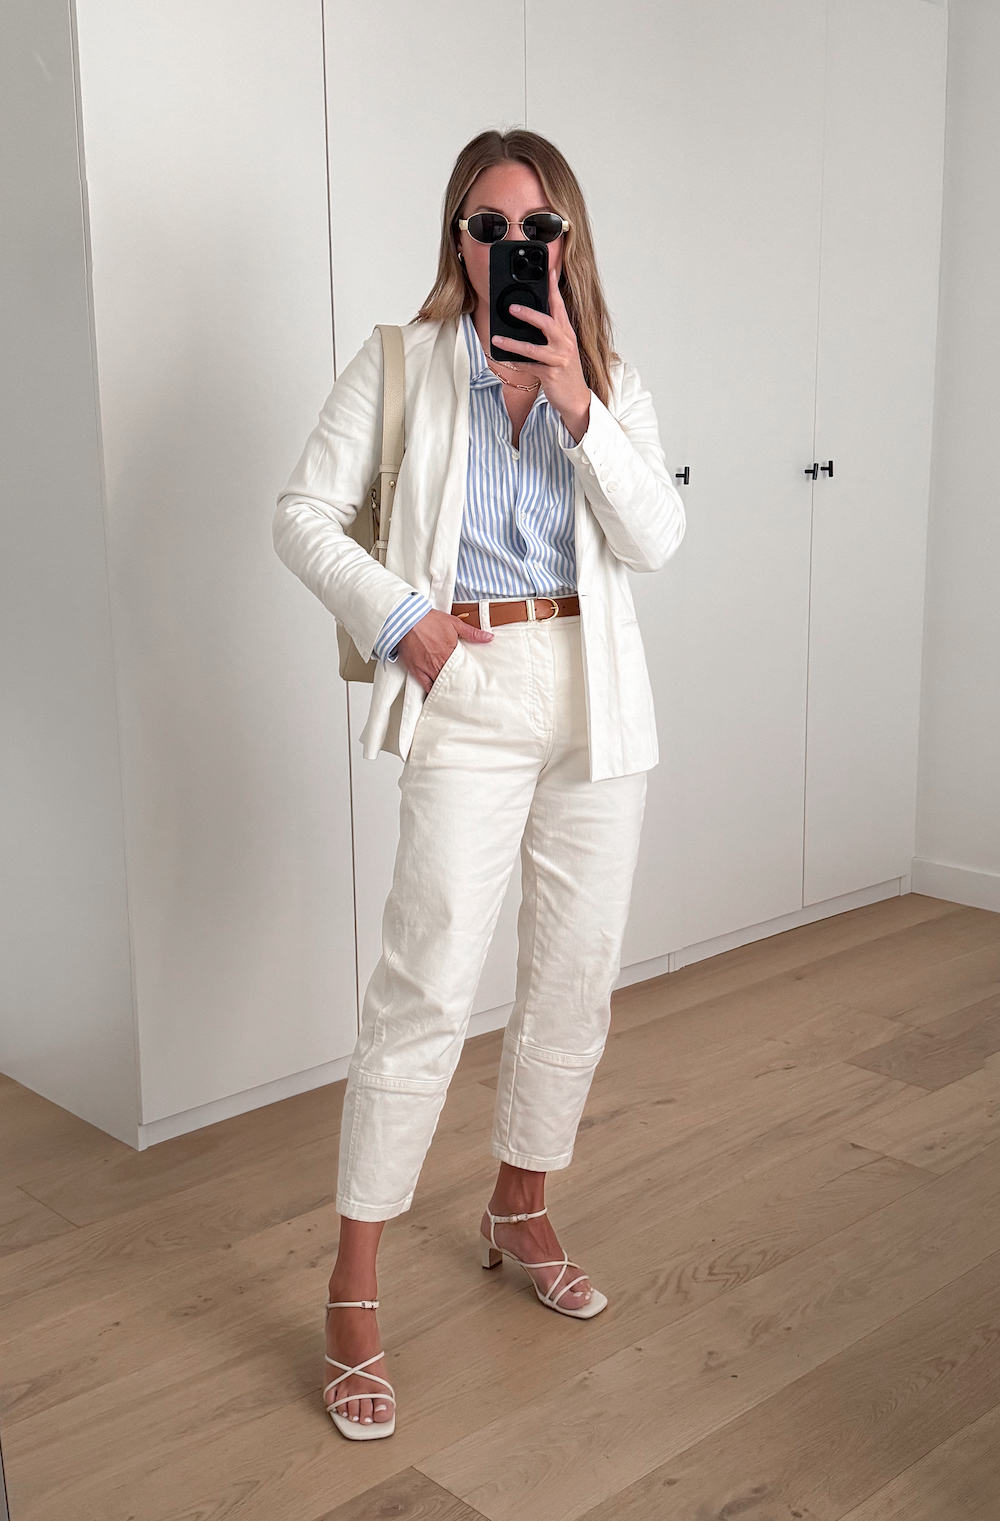 Christal wearing white cargo pants, a blue and white striped button down, a white blazer and white heeled sandals.